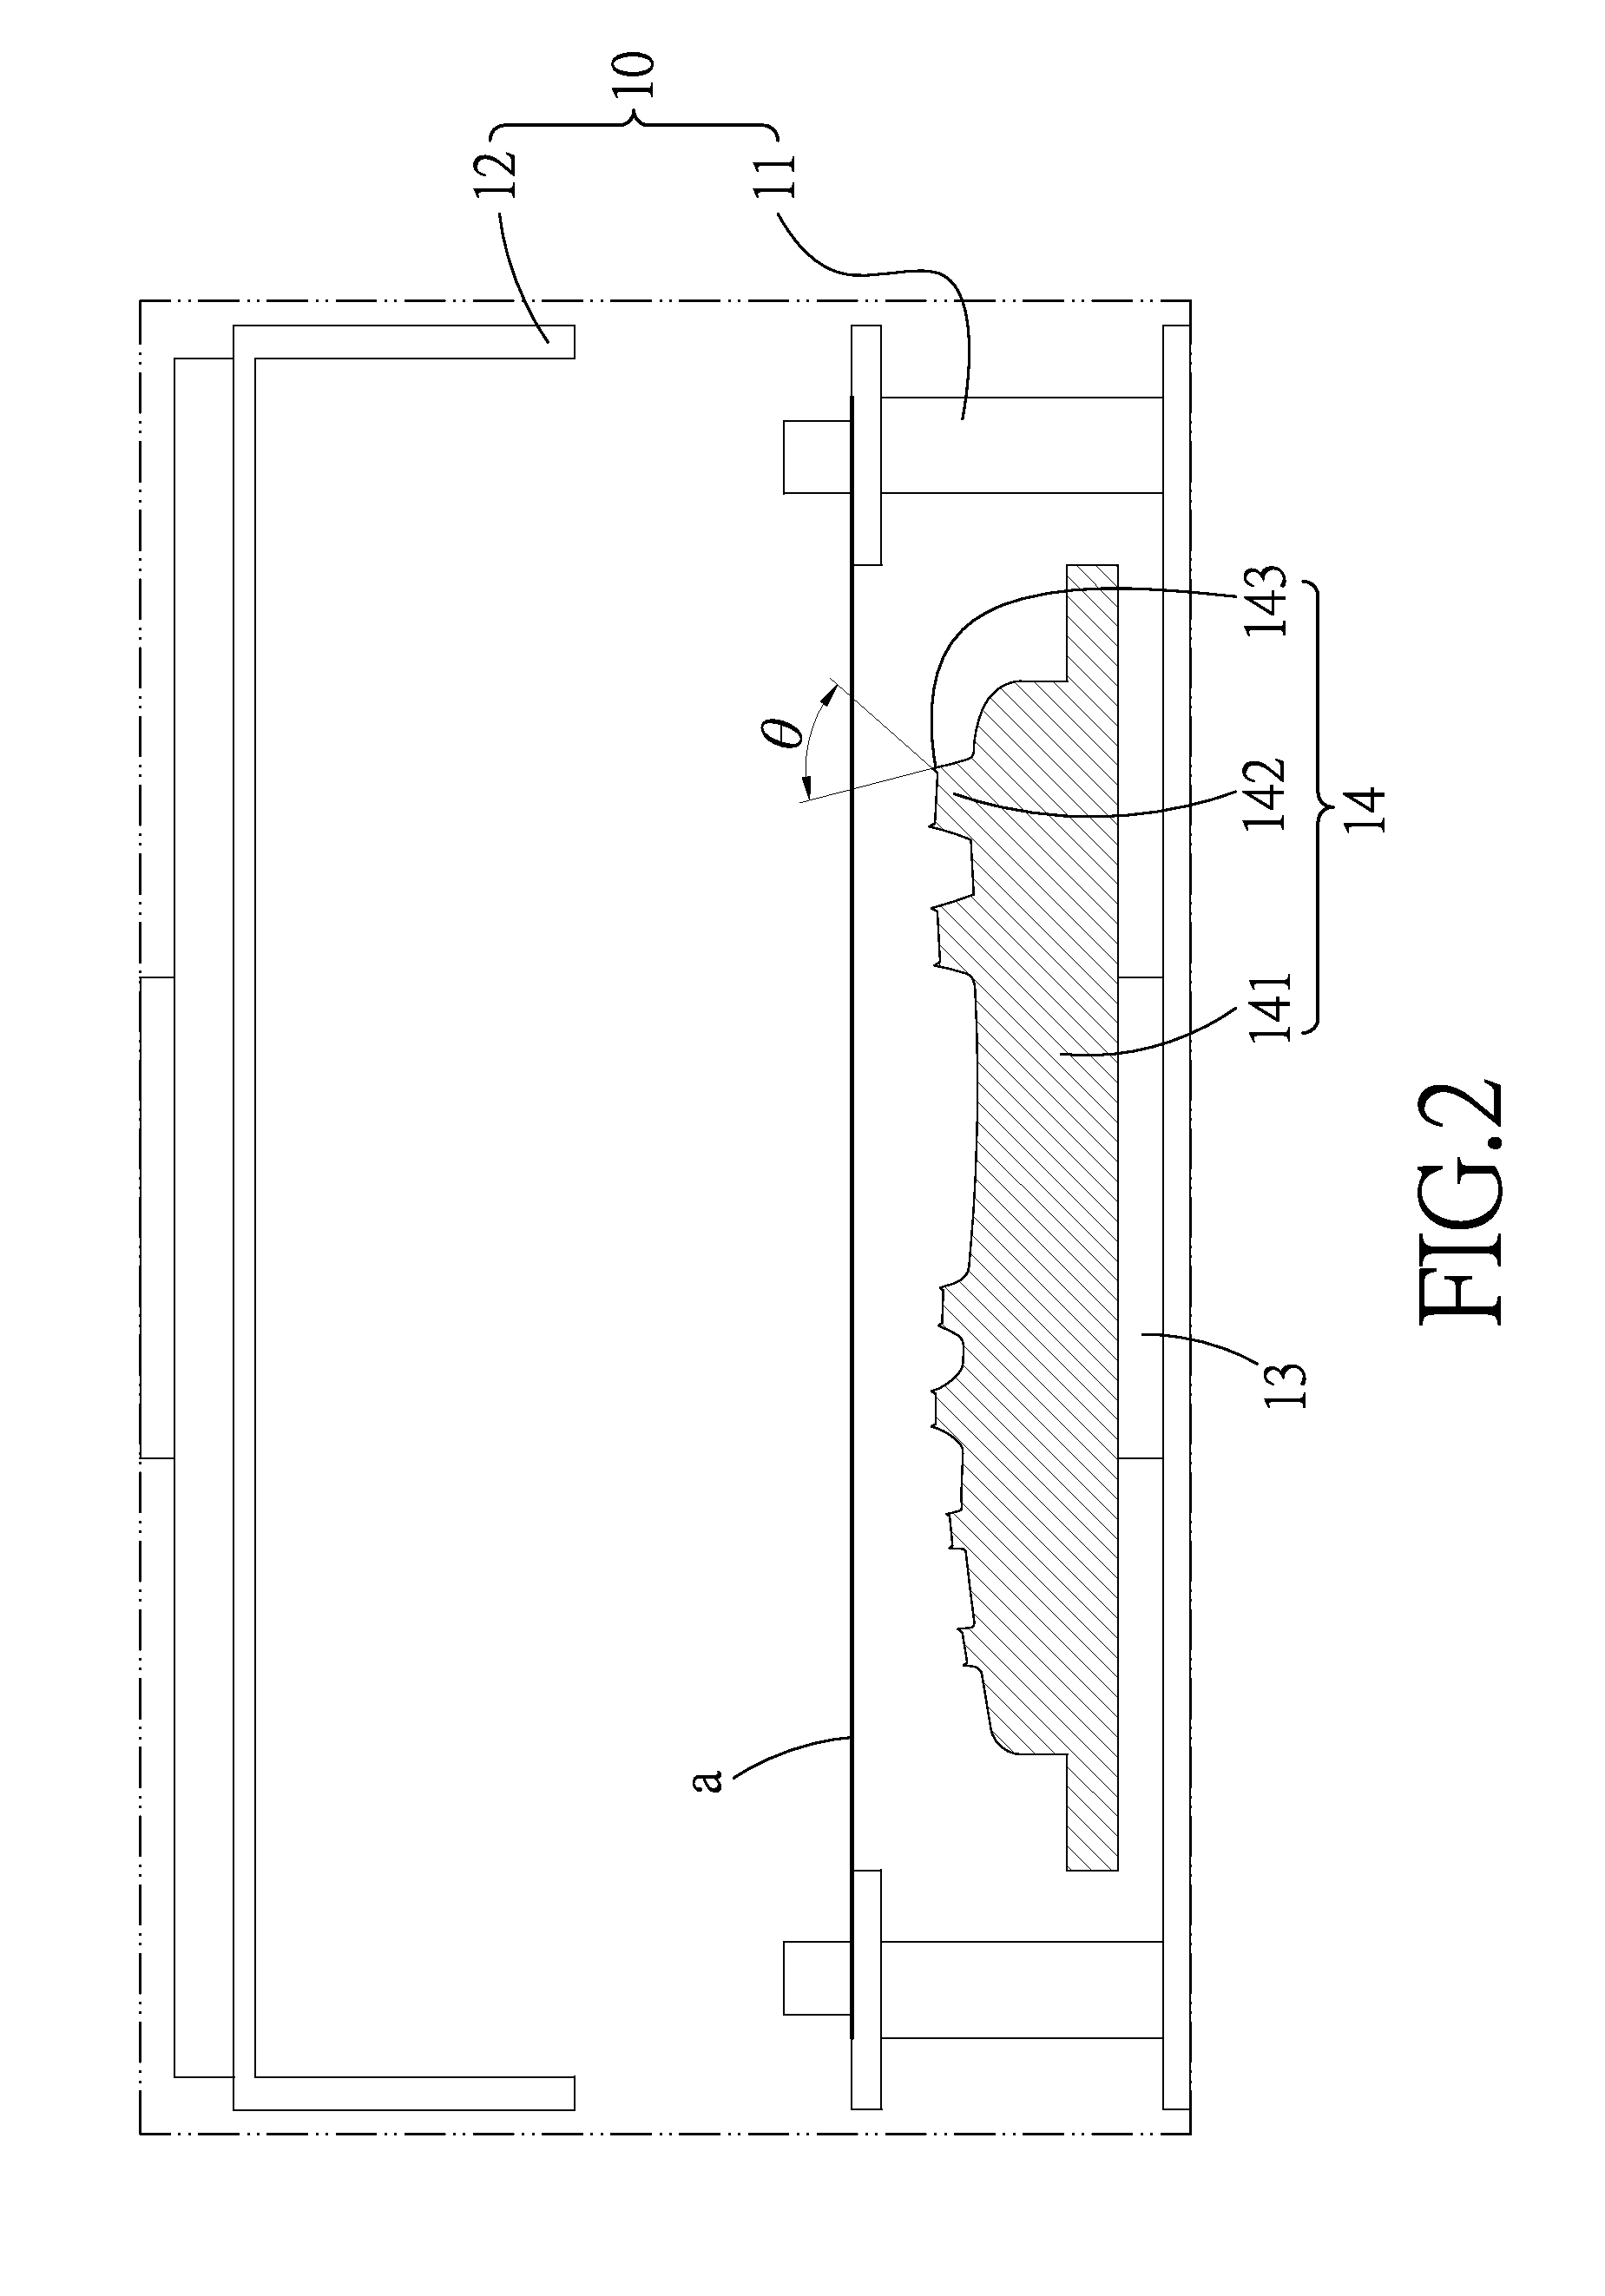 Method for forming a plastic support shell of a sole